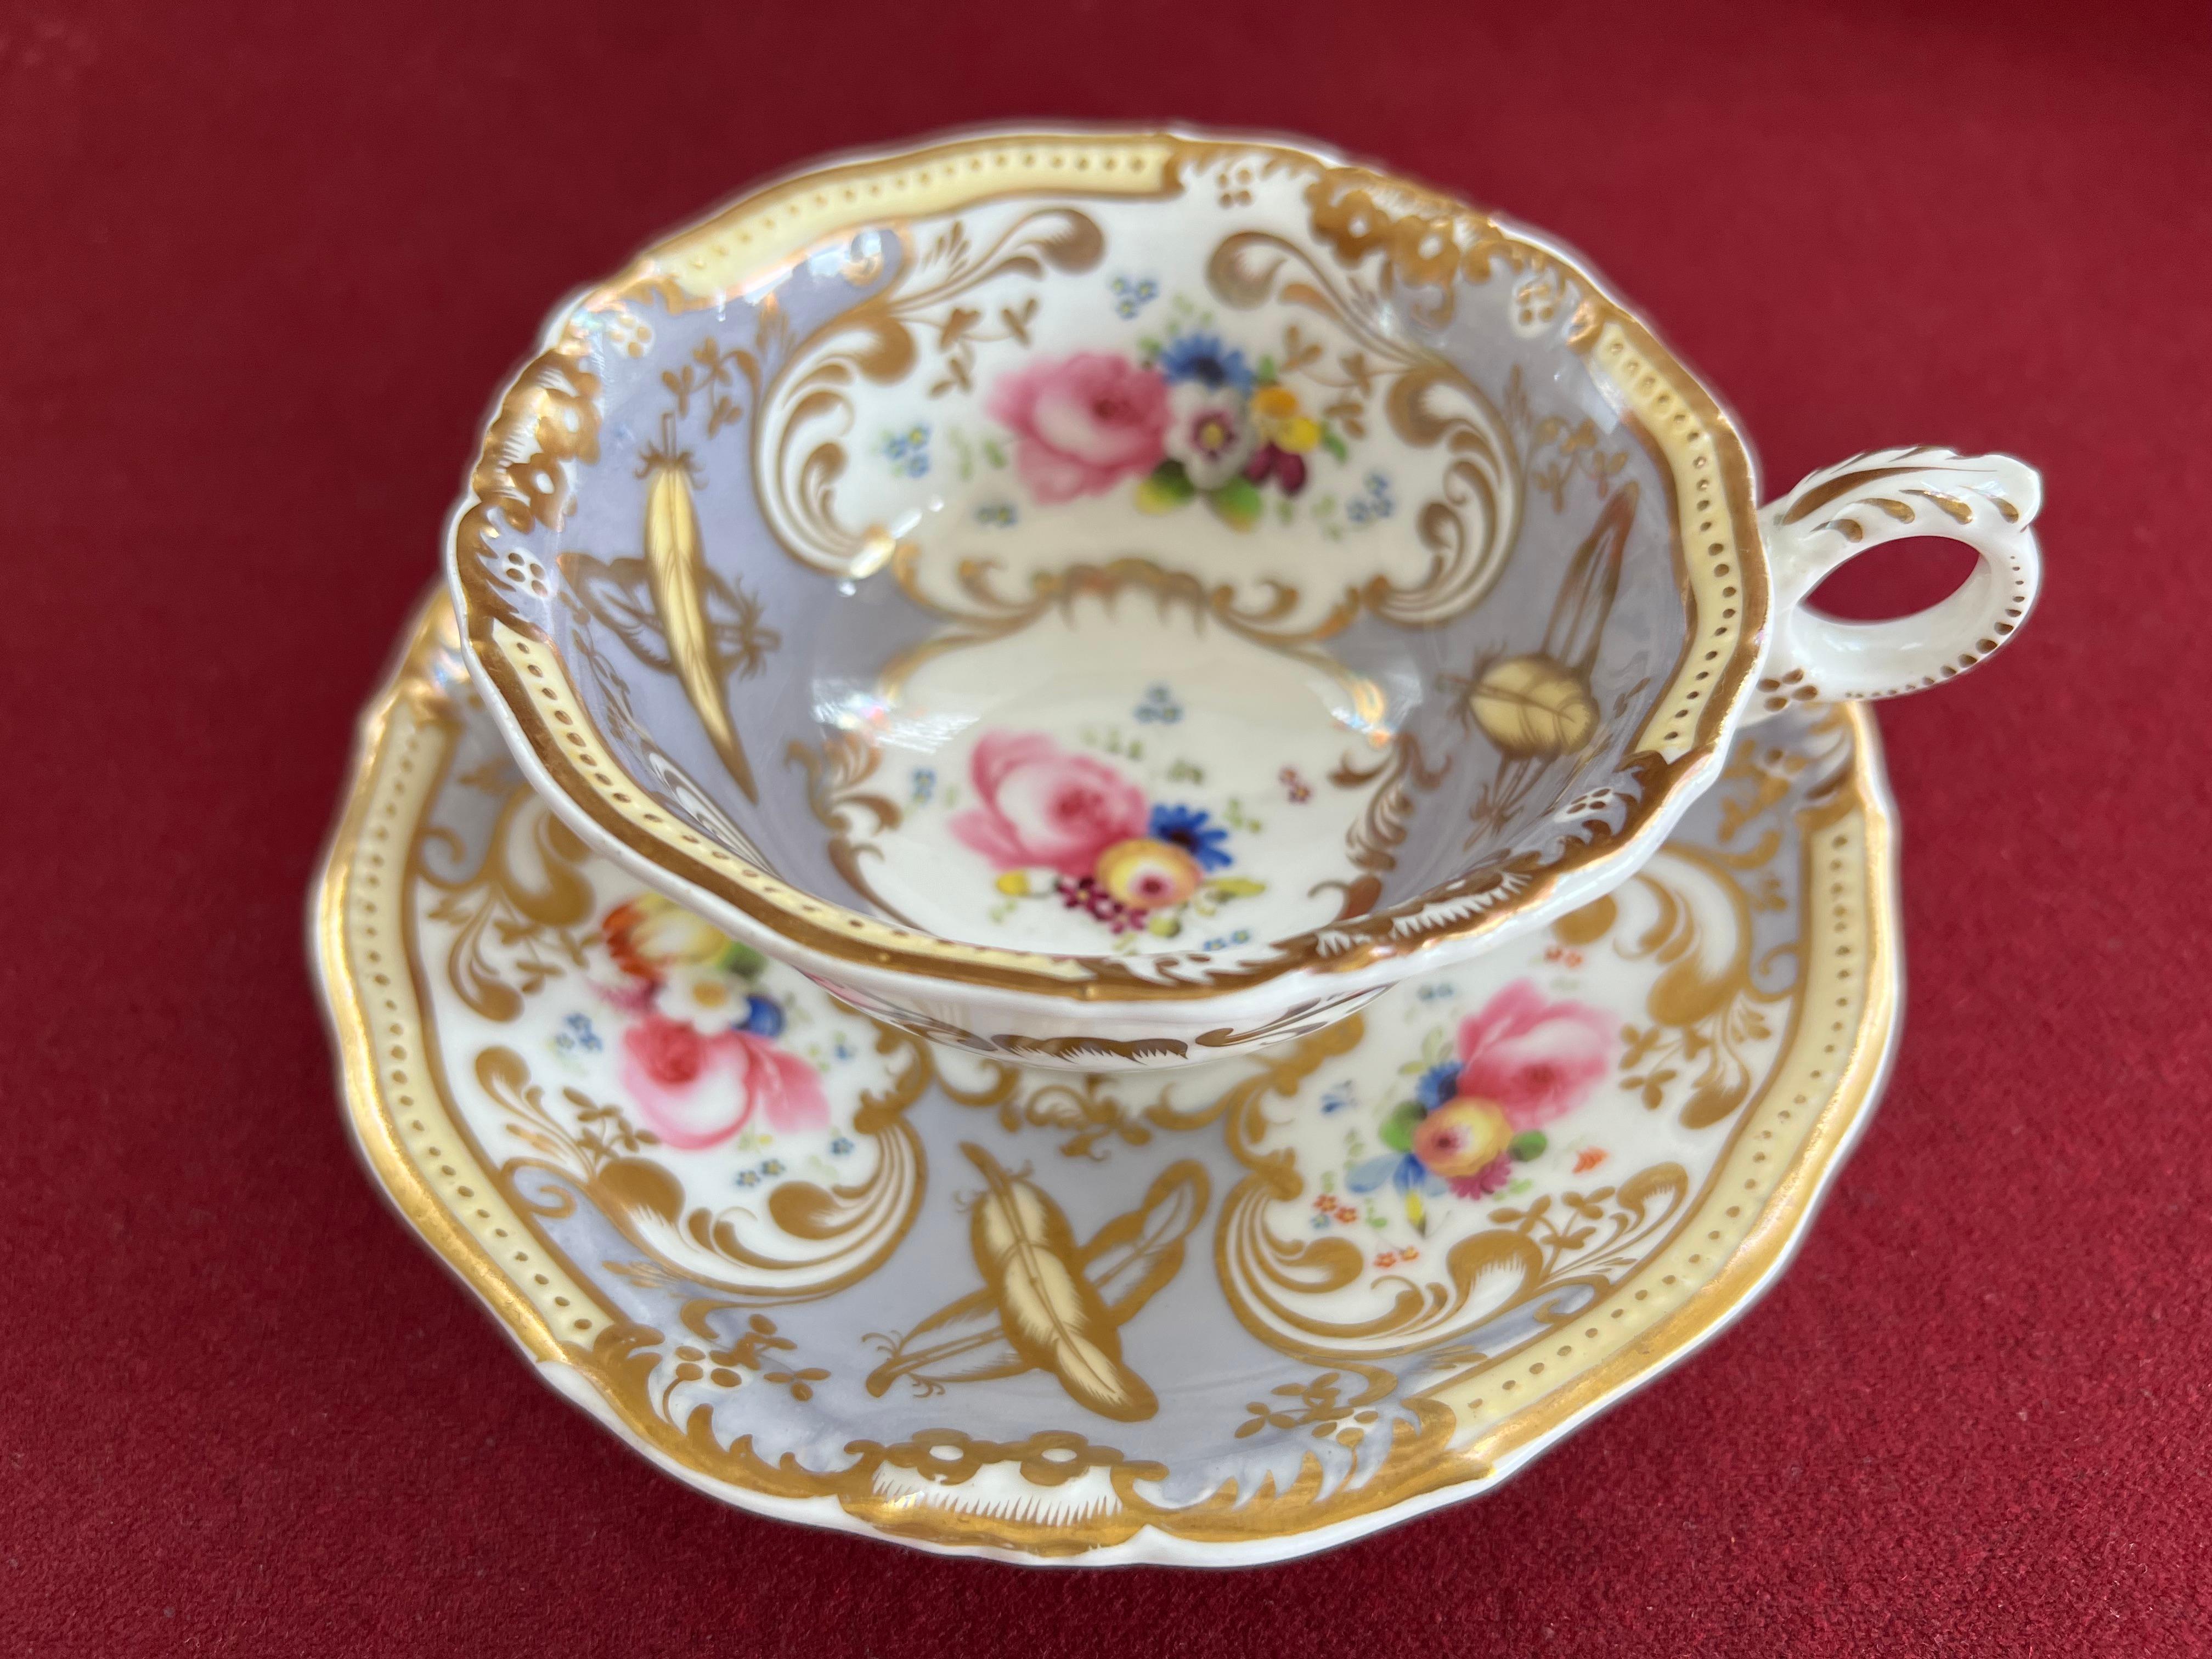 A Grainger's Worcester Porcelain 'Gloster' Shape Part Tea Set c.1835-1840. Finely decorated with panels of flowers on a grey ground and yellow and gold painted feathers.

Consisting of:

1 teapot and lid

3 tea cups

4 saucers 

1 coffee